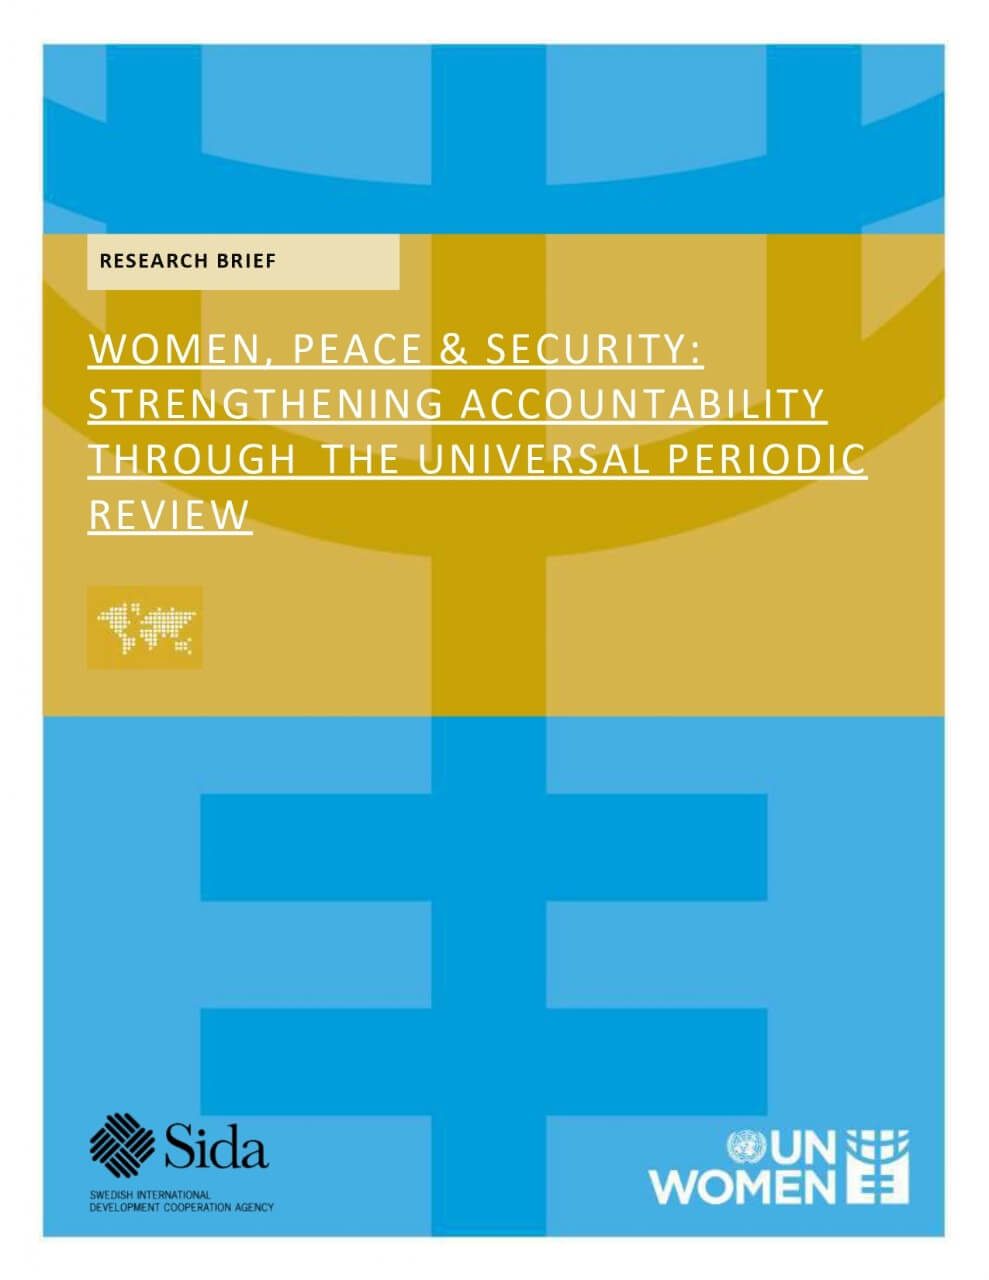 Women, peace and security: Strengthening accountability through the Universal Periodic Review